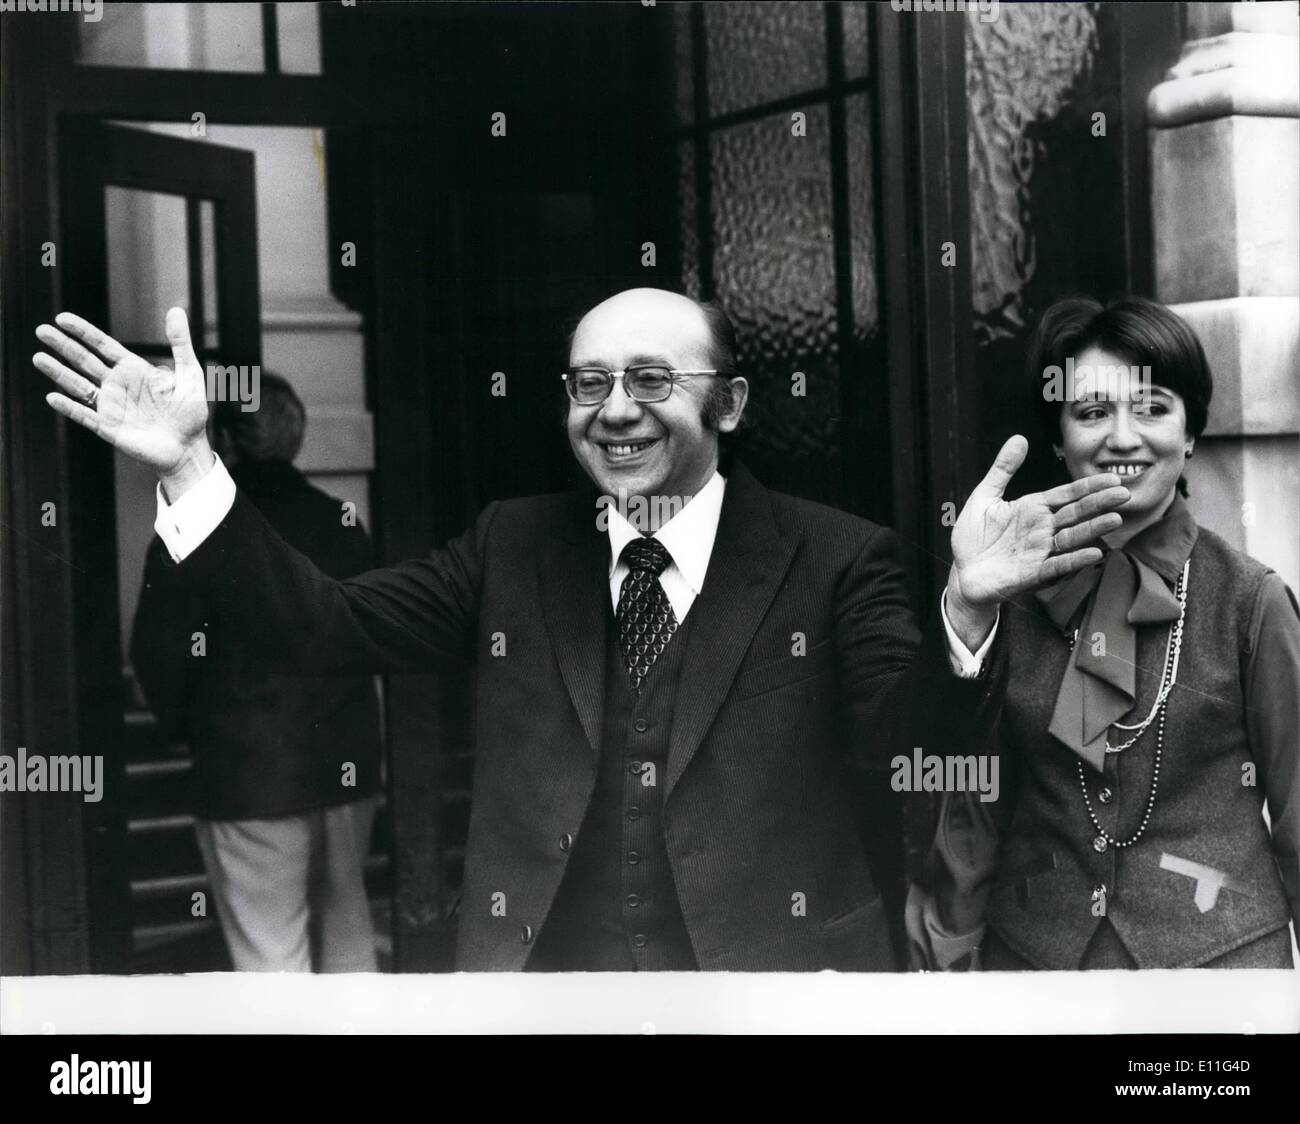 Nov. 11, 1977 - Russian Gennadi Rozhdestvensky The New BBC Symphony Orchestra's Chief Conductor: At a press conference held at Langham Gallery, the BBC announced the appointment to the BBC Symphony Orchestra of Gennadi Rozhdestvensky as Chief Conductor. The Orchestra has been without a Chief conductor since the death of Rudolf Kempe in May last year. Gennadi was born in Moscow in 1931, he has been chief conductor of the Bolshei Theatre and USSR radio and television Symphony Orchestra. He made his debut with the BBC Symphony Orchestra in 1969 with has wife, pianist Viktoria Postnikova Stock Photo